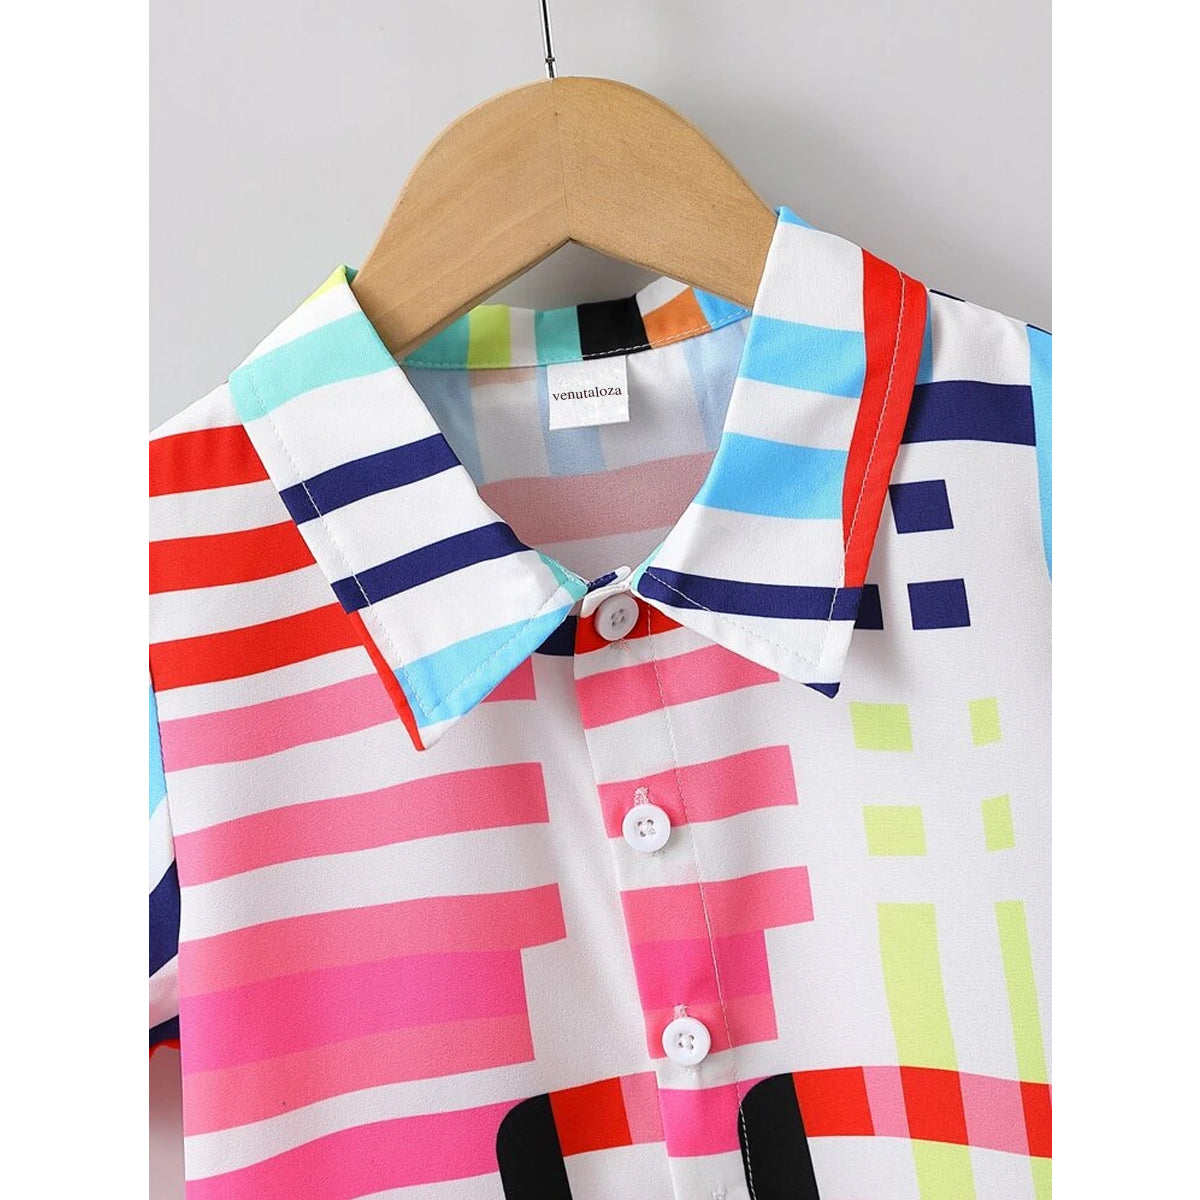 Venutaloza Boy's Worldwide & Letters and Plaid Patched Pocket Designer Button Front (Combo Pack Of 3) Shirt For Boy.